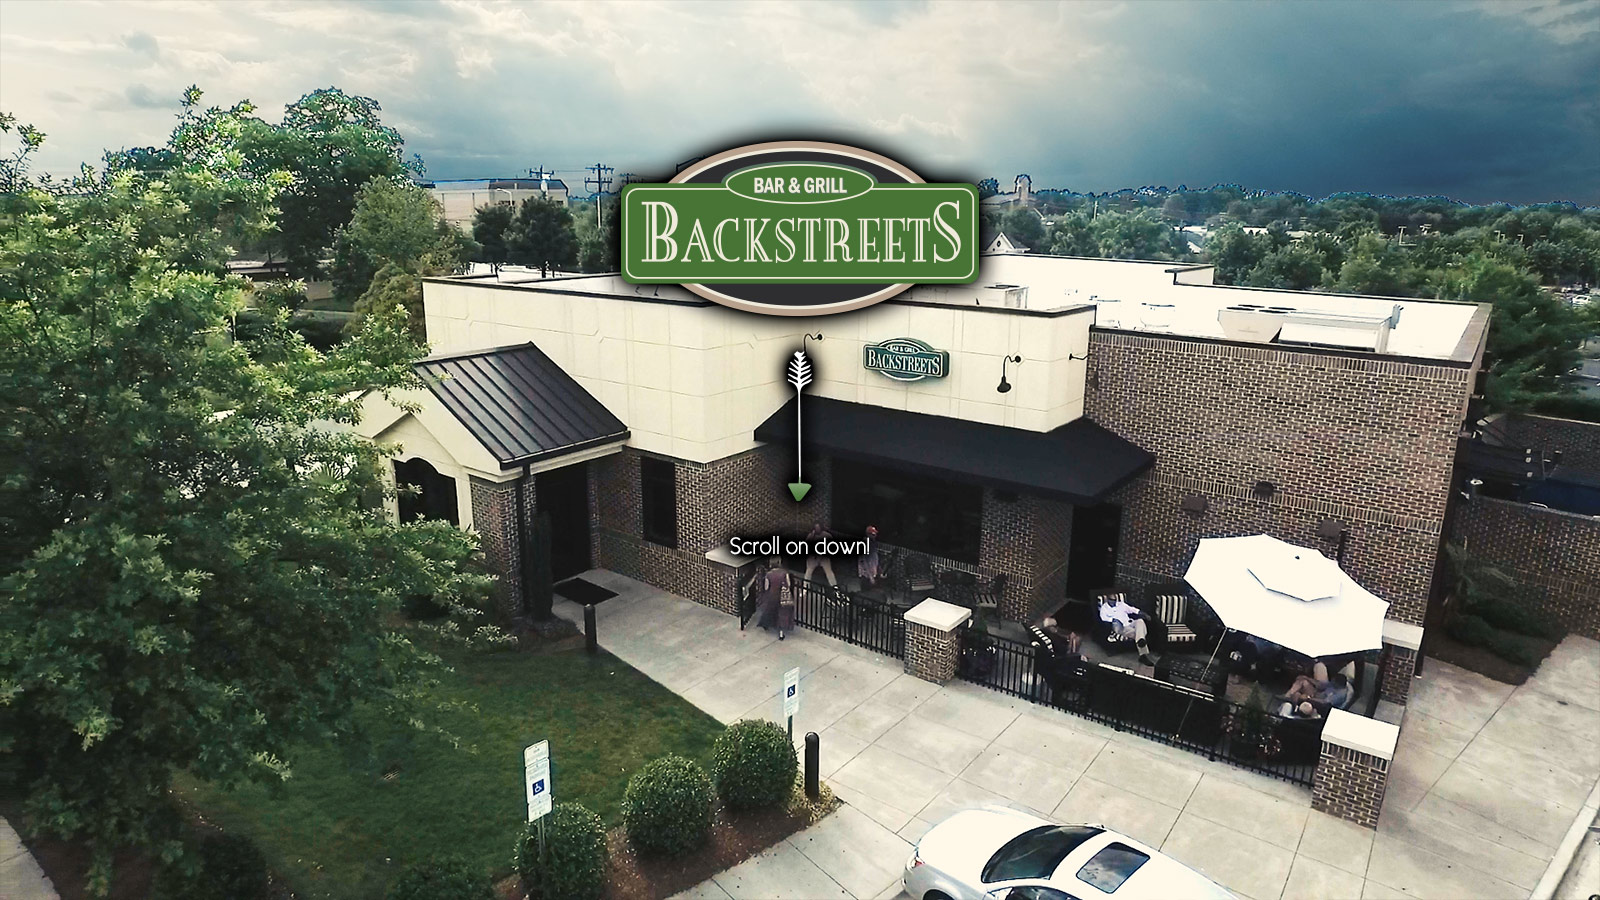 The best backstreet restaurant in Hickory, North Carolina The best